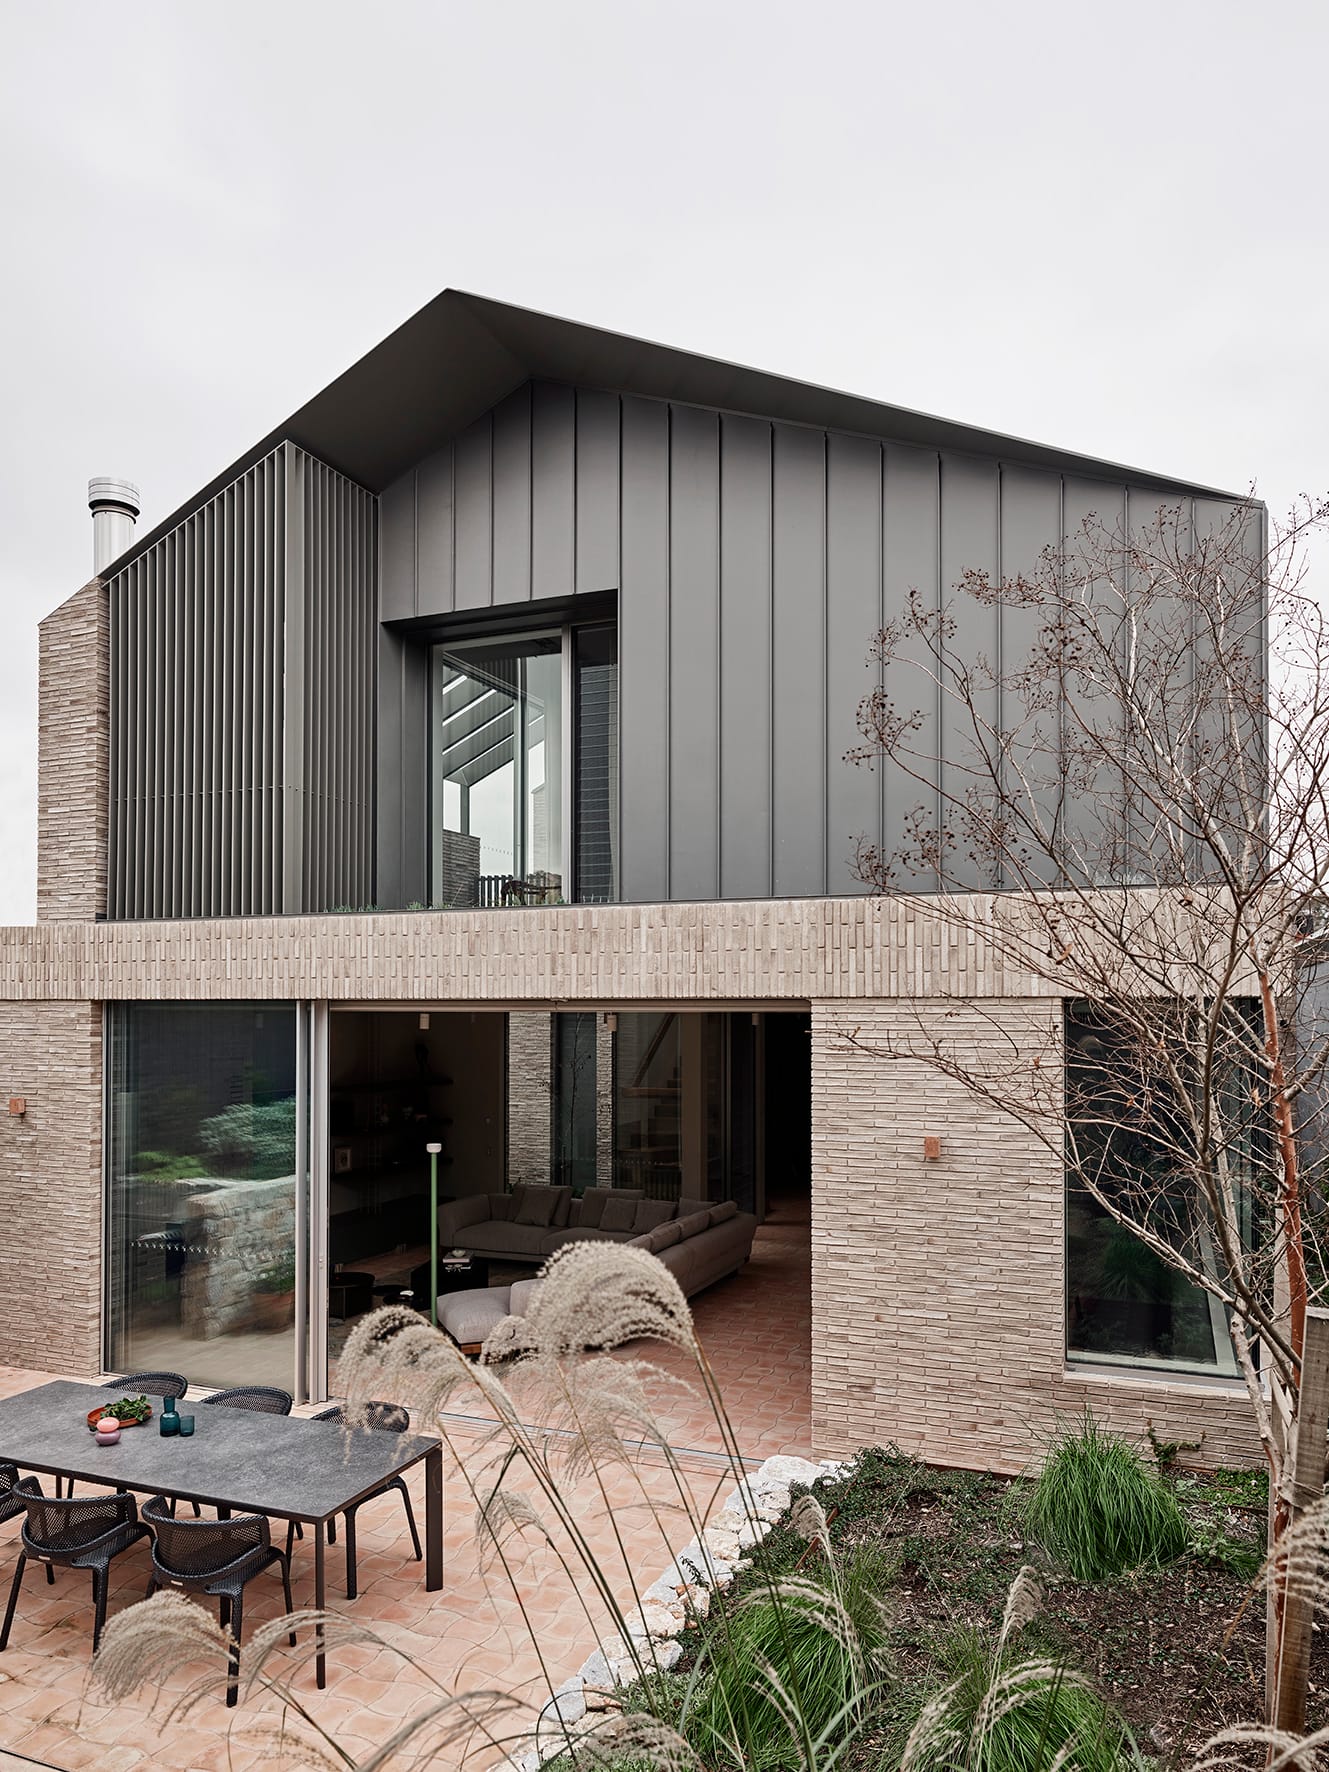 Terra Firma by RobsonRak. Photography by Mark Roper showing the rear facade of this new house